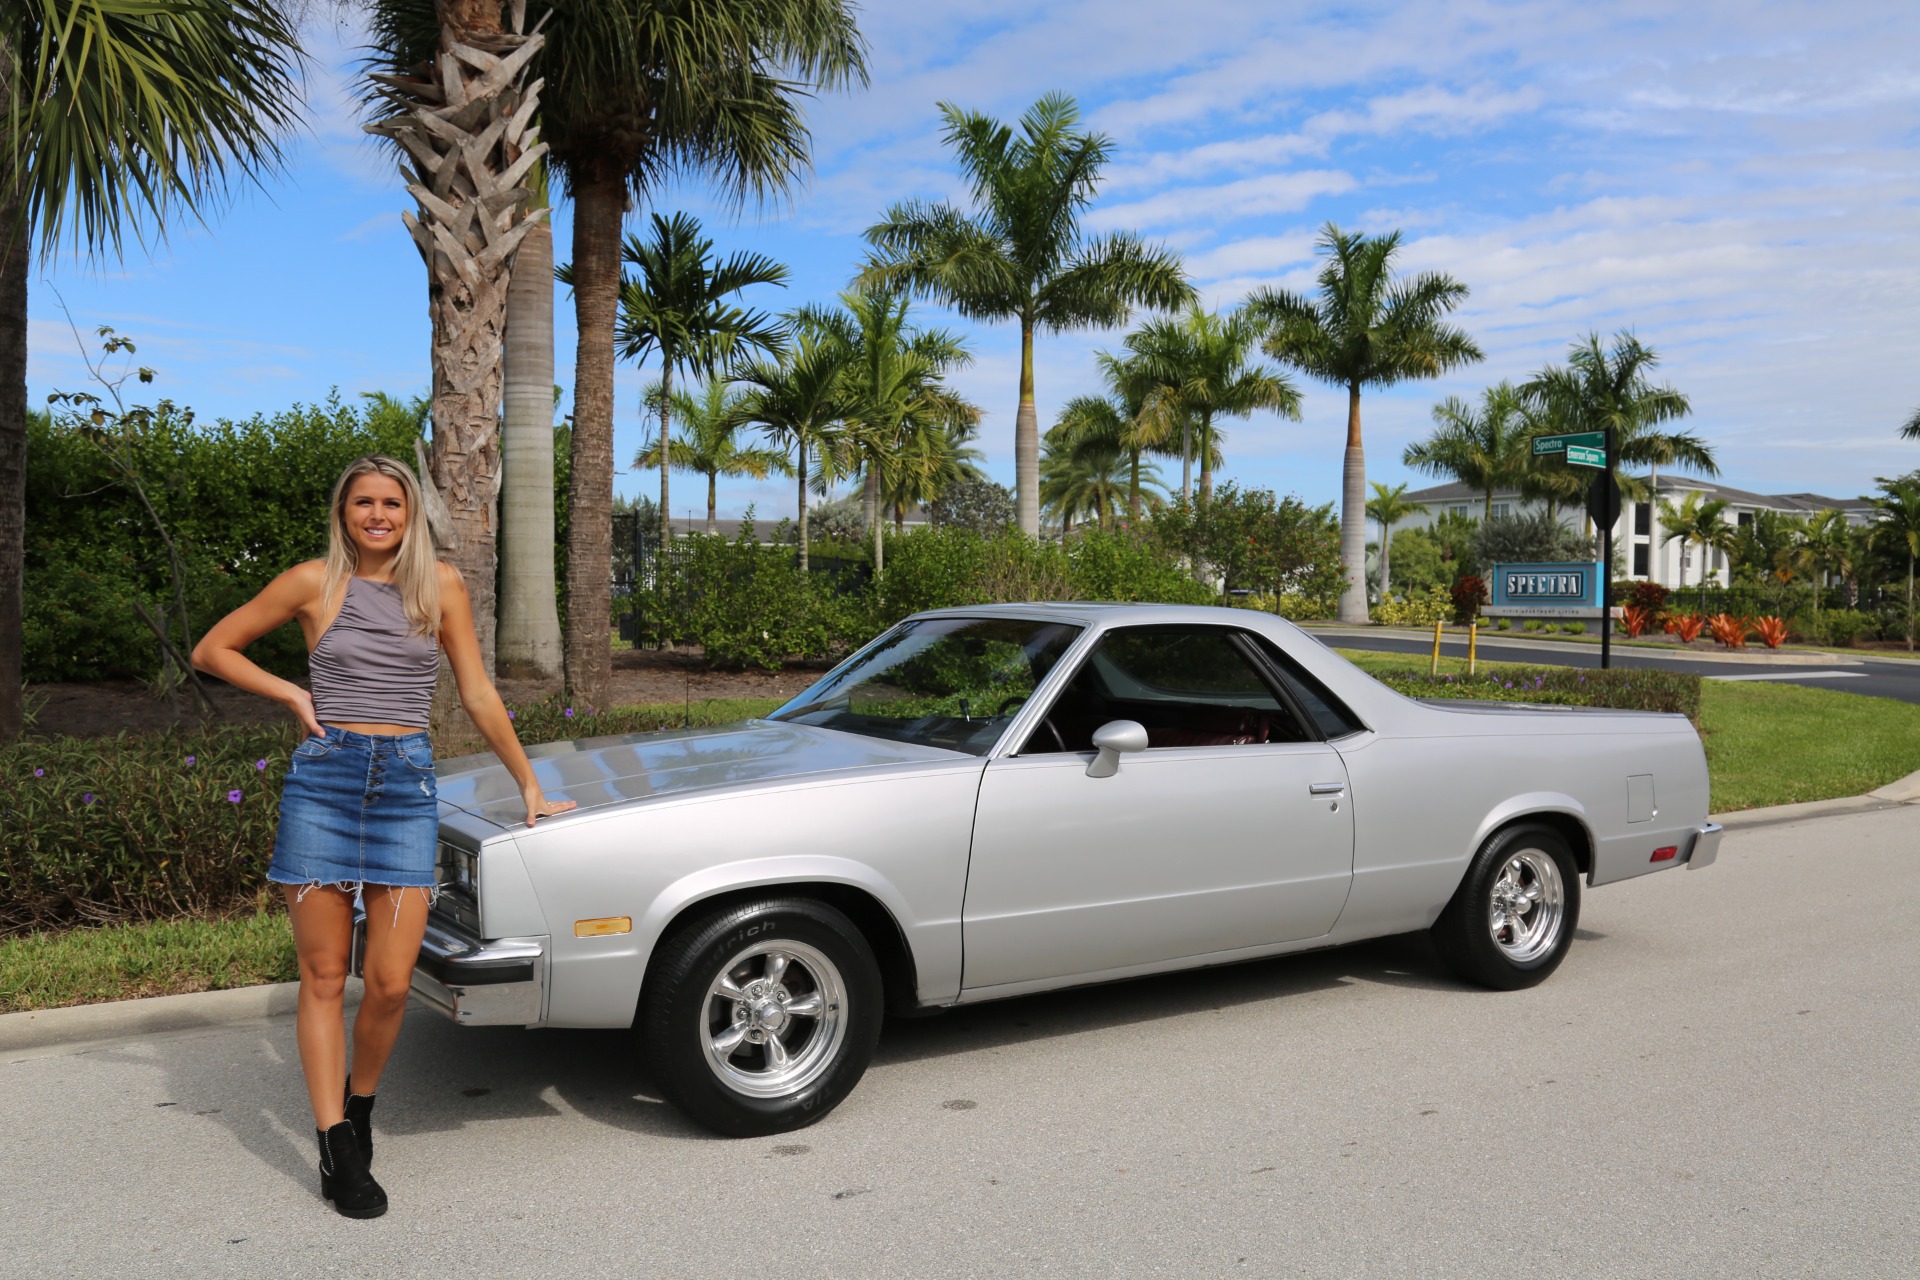 Used 1985 Chevrolet El Camino ss V8 Auto SS for sale Sold at Muscle Cars for Sale Inc. in Fort Myers FL 33912 1